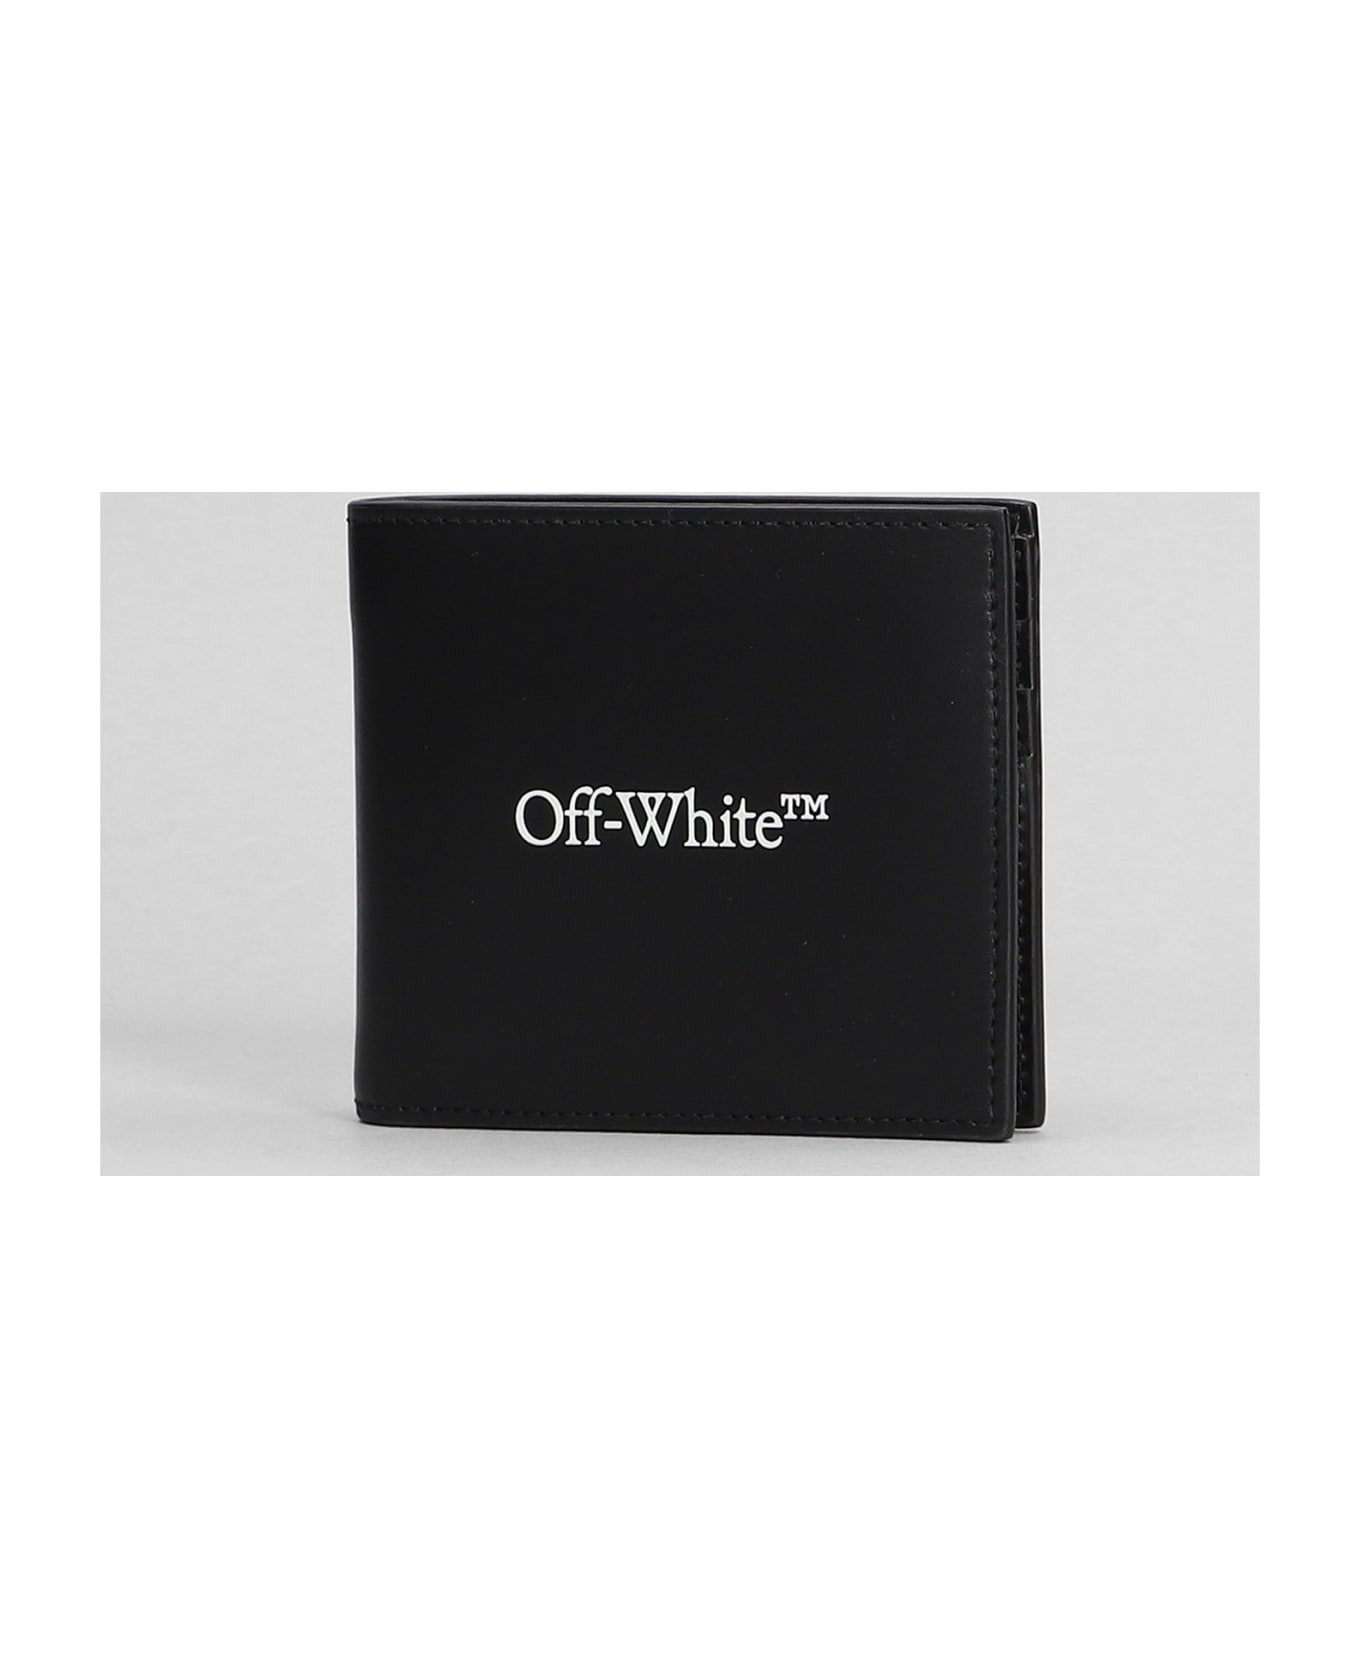 Off-White Wallet In Black Leather - black